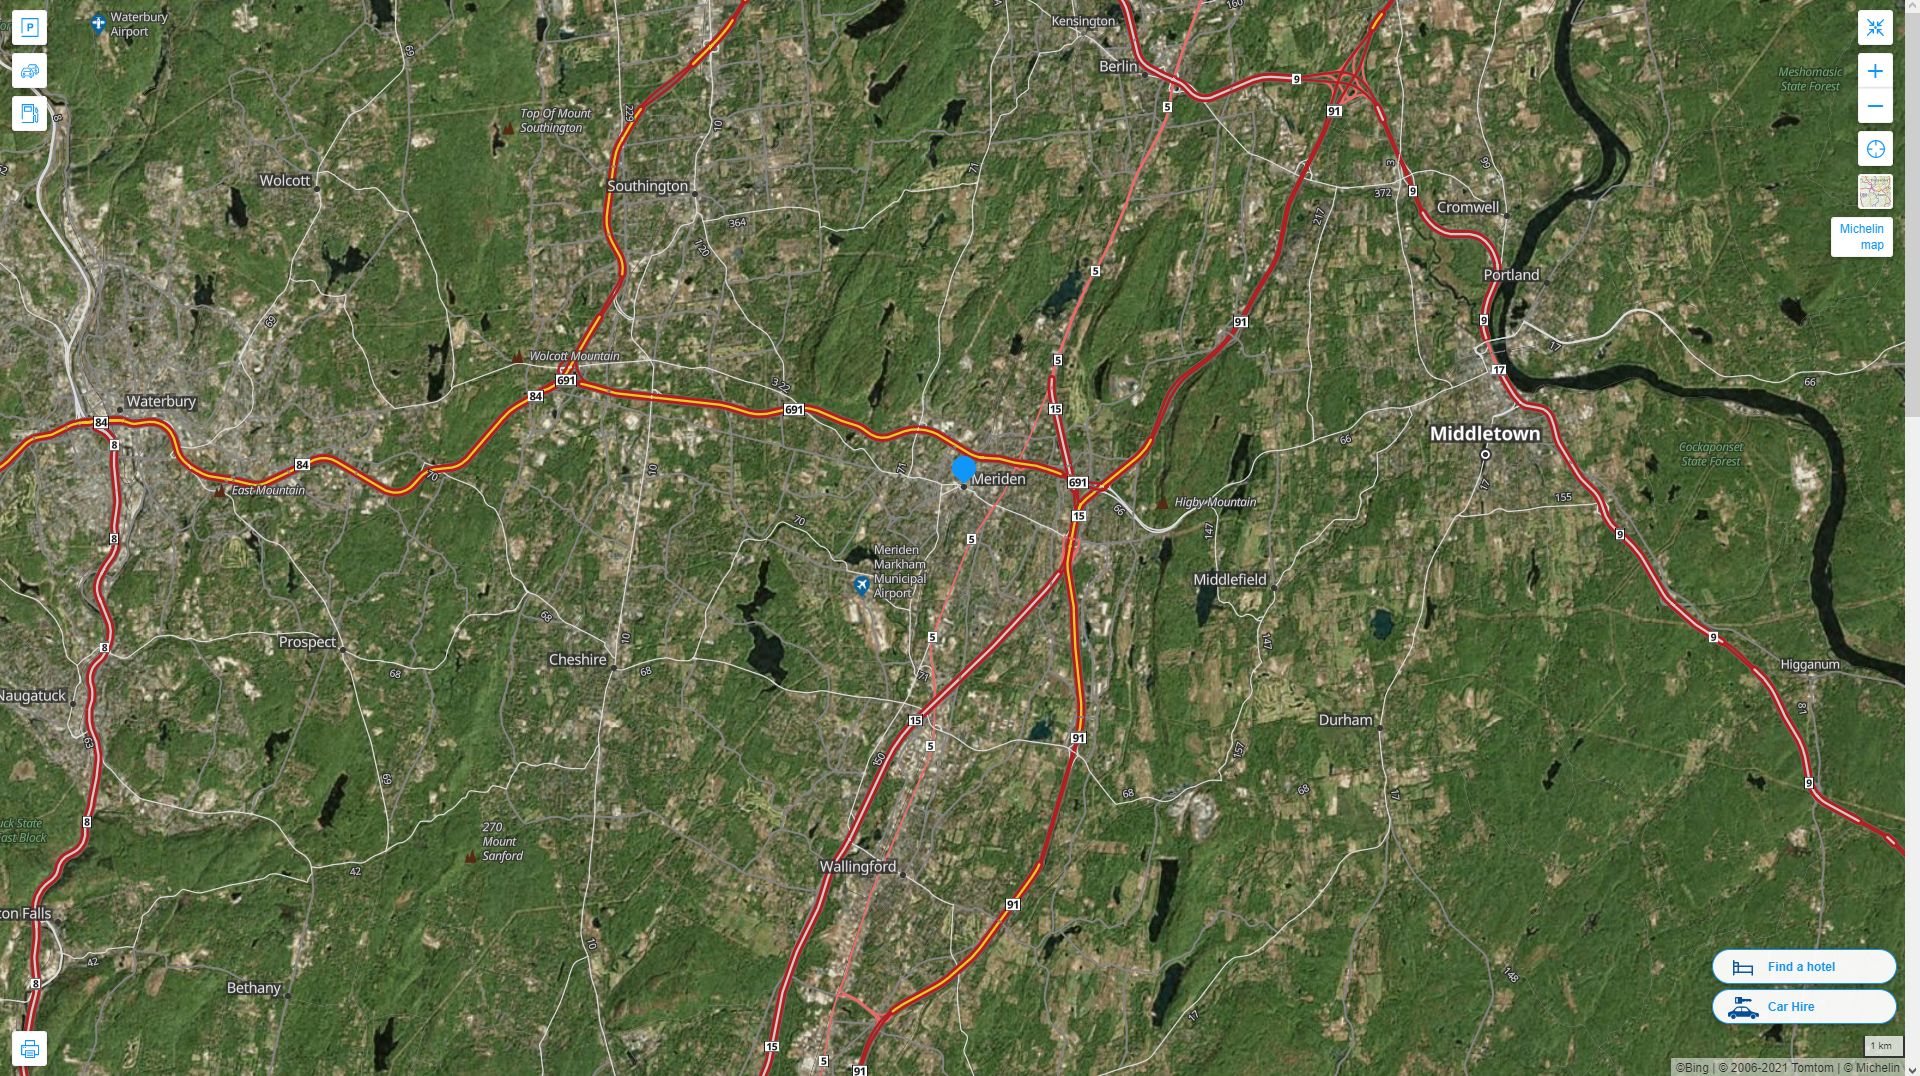 Meriden Connecticut Highway and Road Map with Satellite View